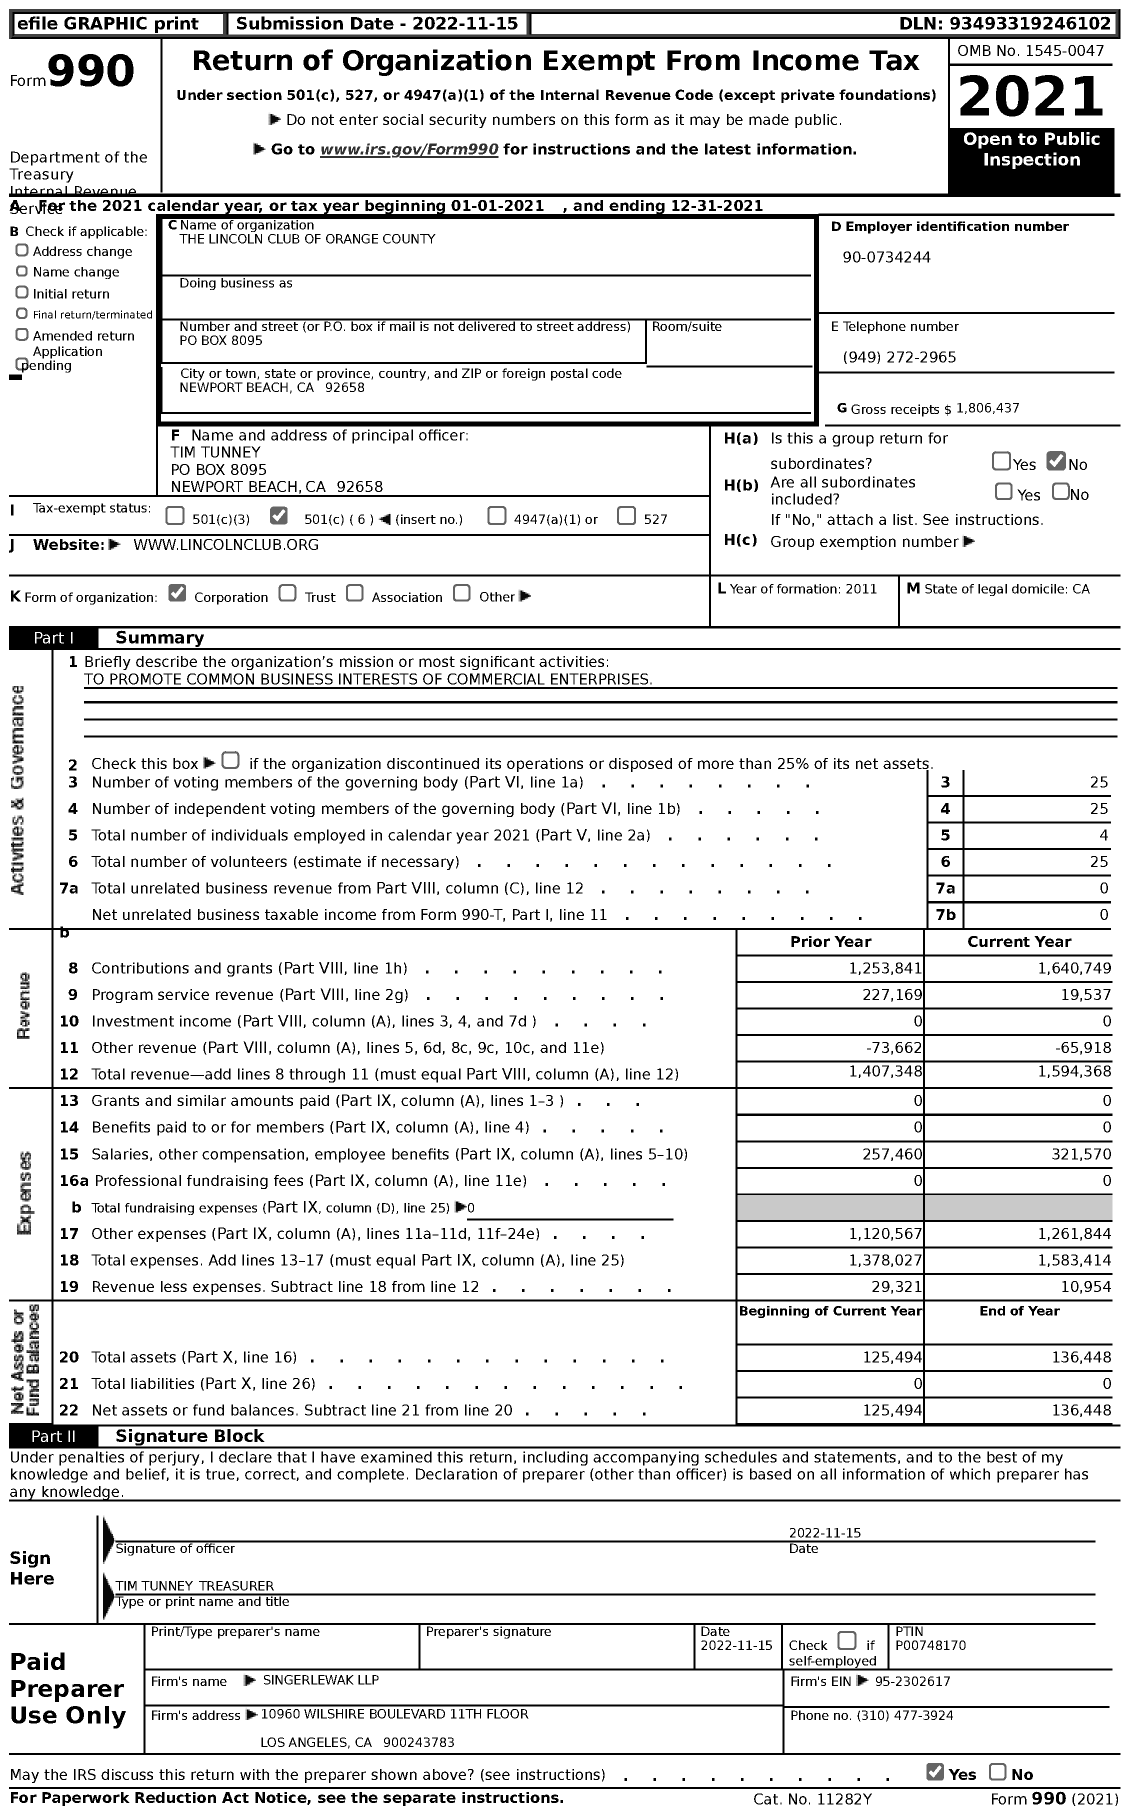 Image of first page of 2021 Form 990 for The Lincoln Club of Orange County